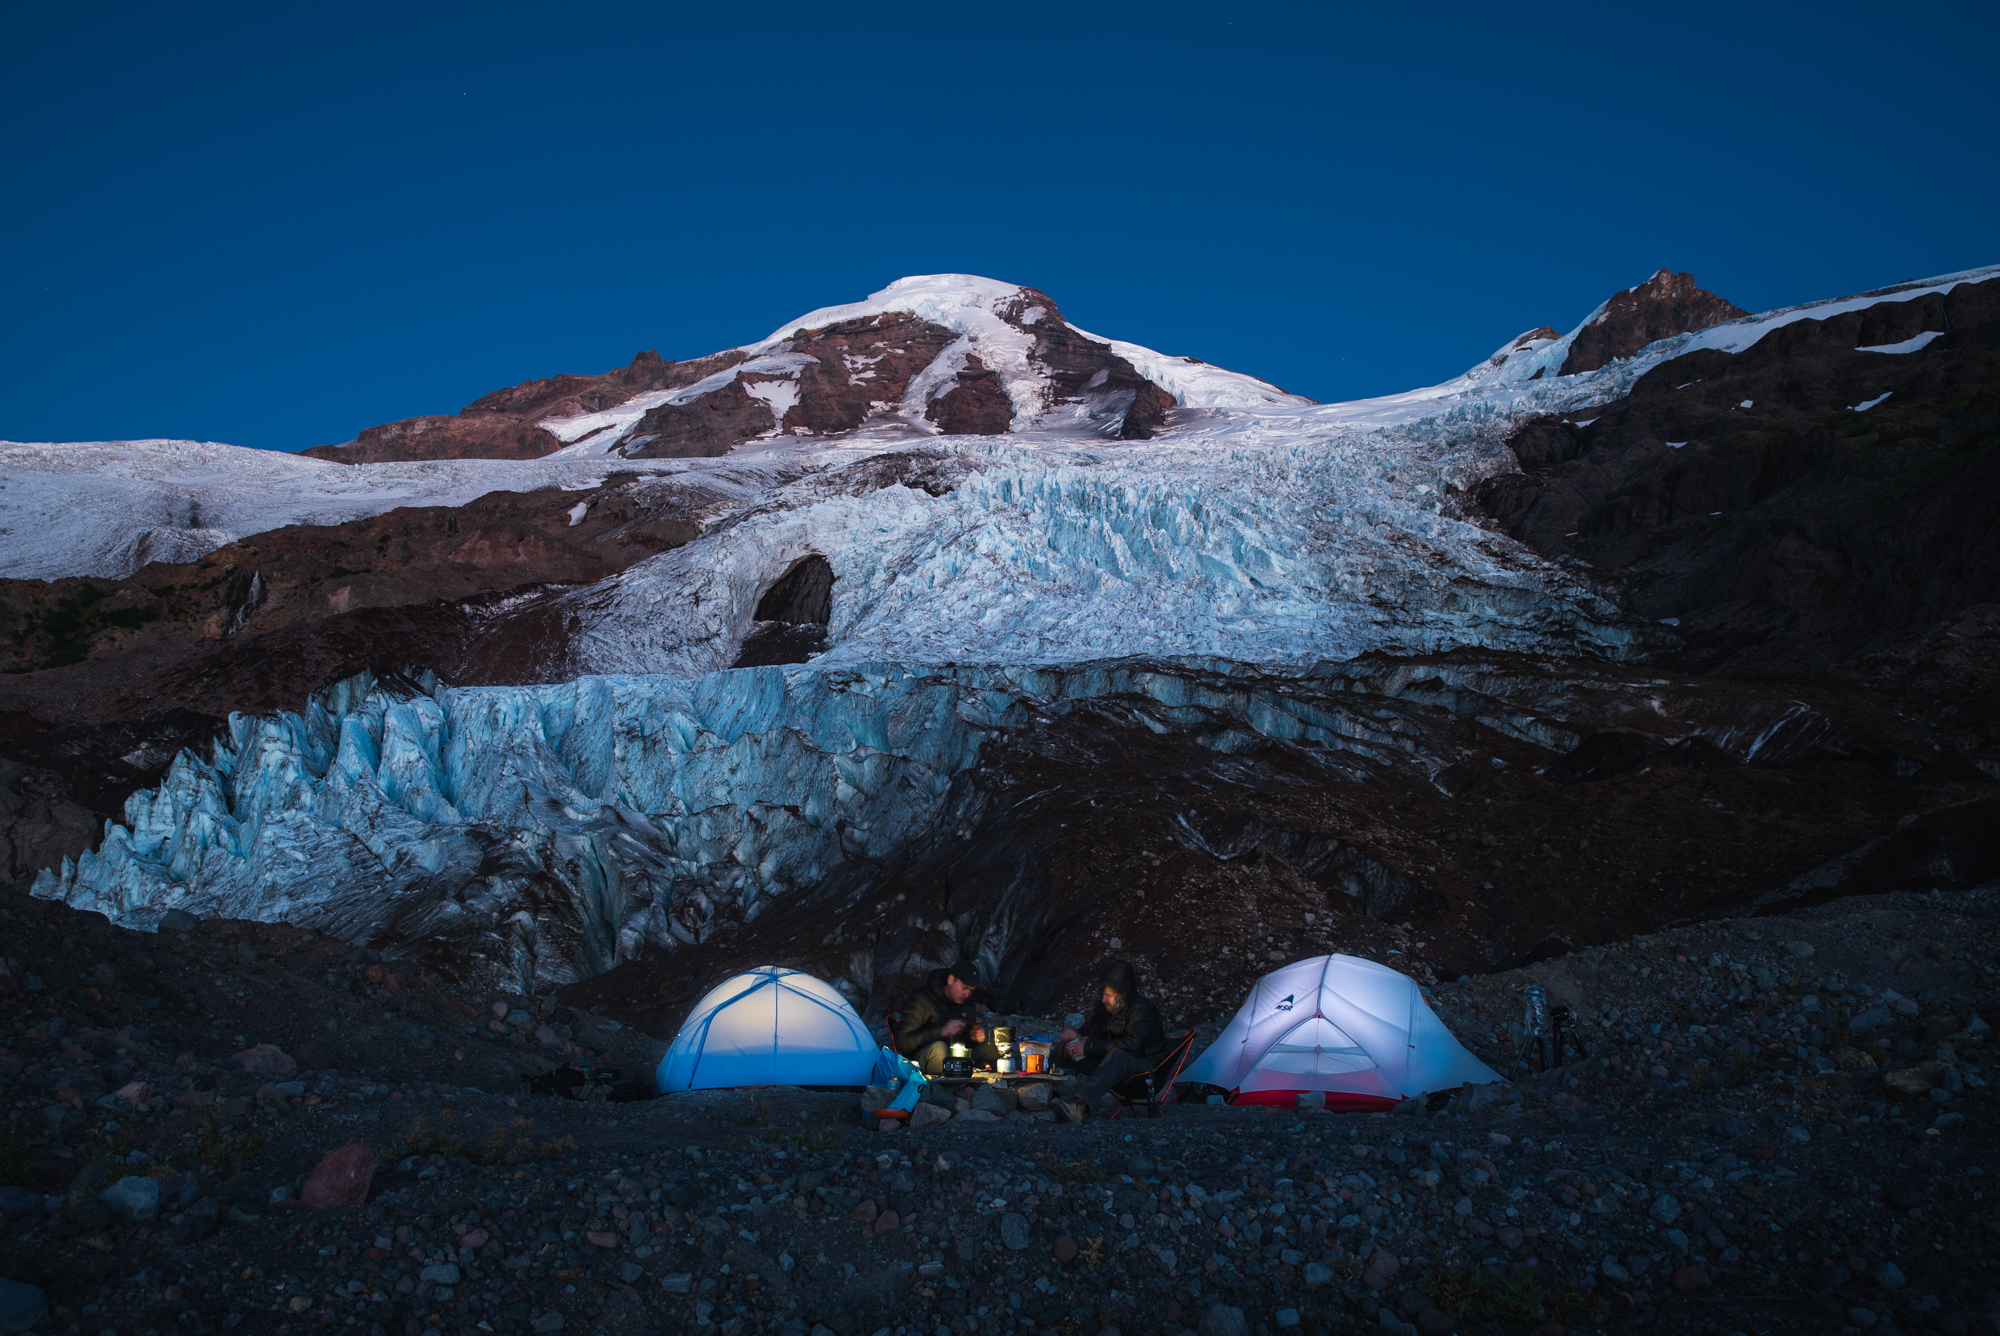 Blue hour of our camp on Coleman Glacier on Mount Baker where we spent two weeks living.